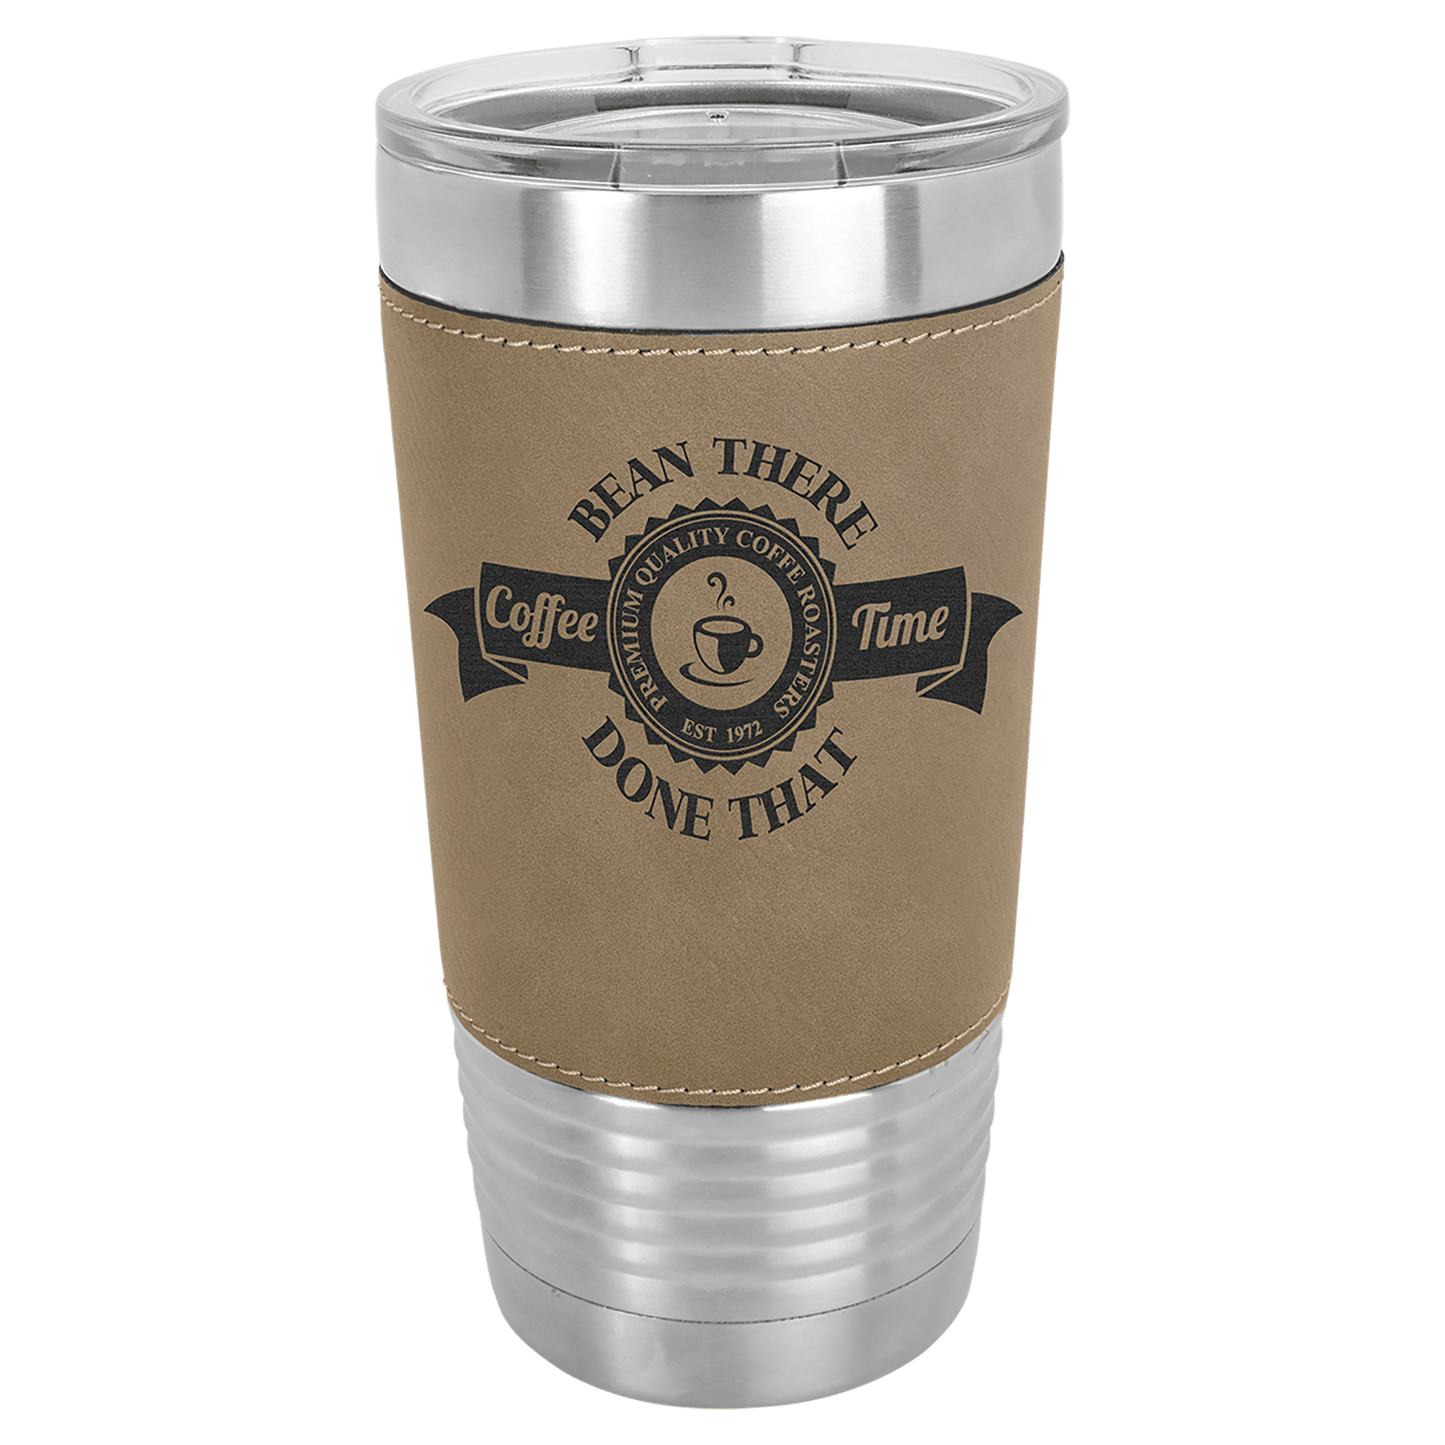 Polar Camel 20 oz. Leatherette Tumbler with Clear Lid - Professional Artwork